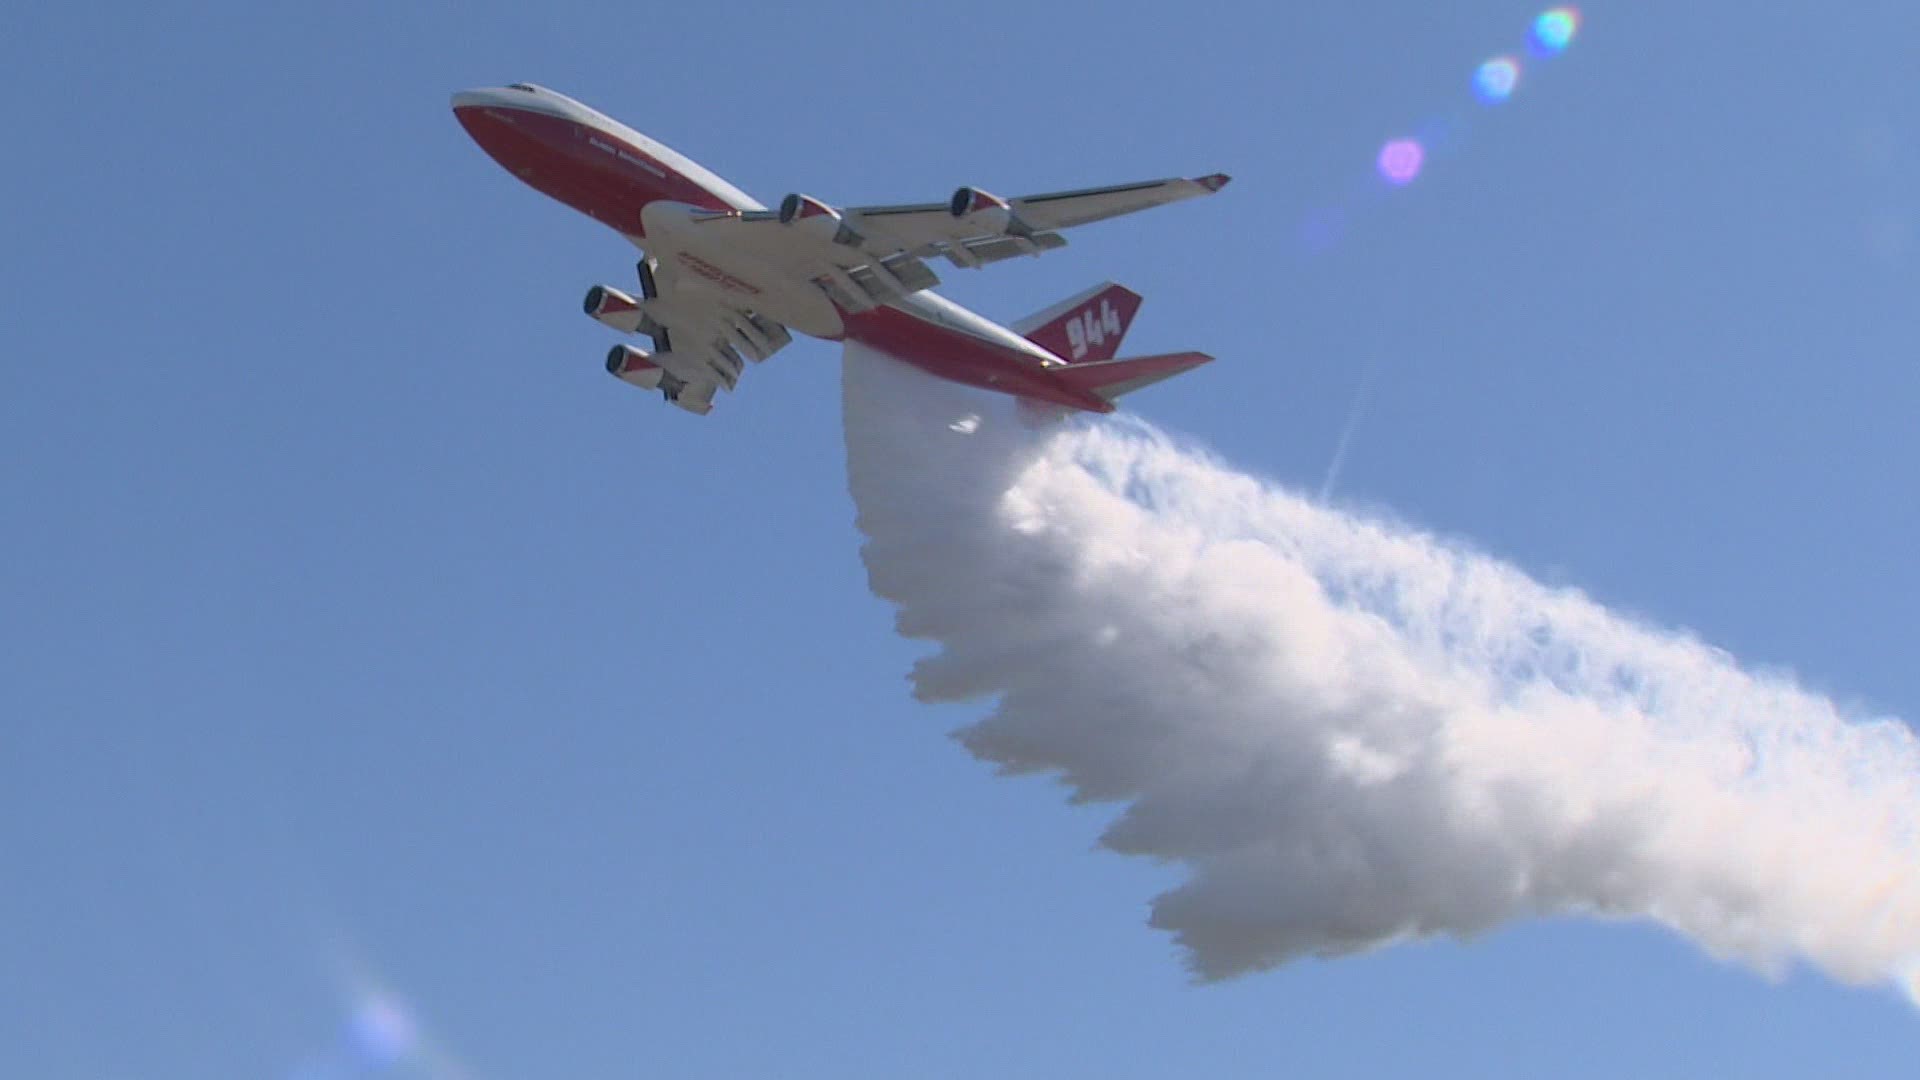 Global SuperTanker, a former 747 passenger plane, can dump 19,200 gallons of water on wildfires. State officials are looking for a way to keep it based in Moses Lake